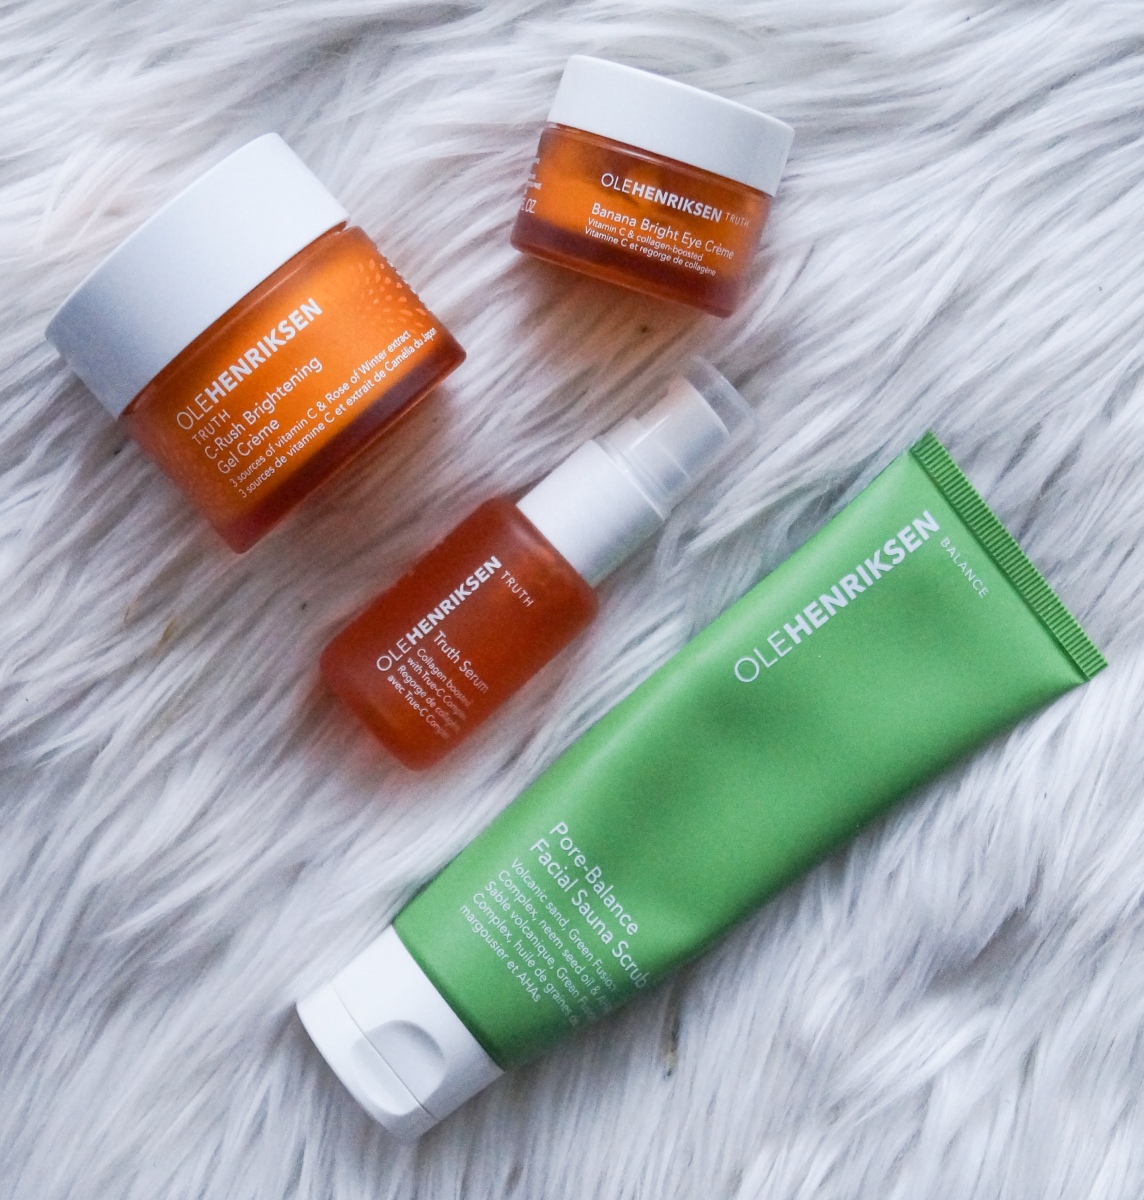 My Top Ole Henriksen Products –